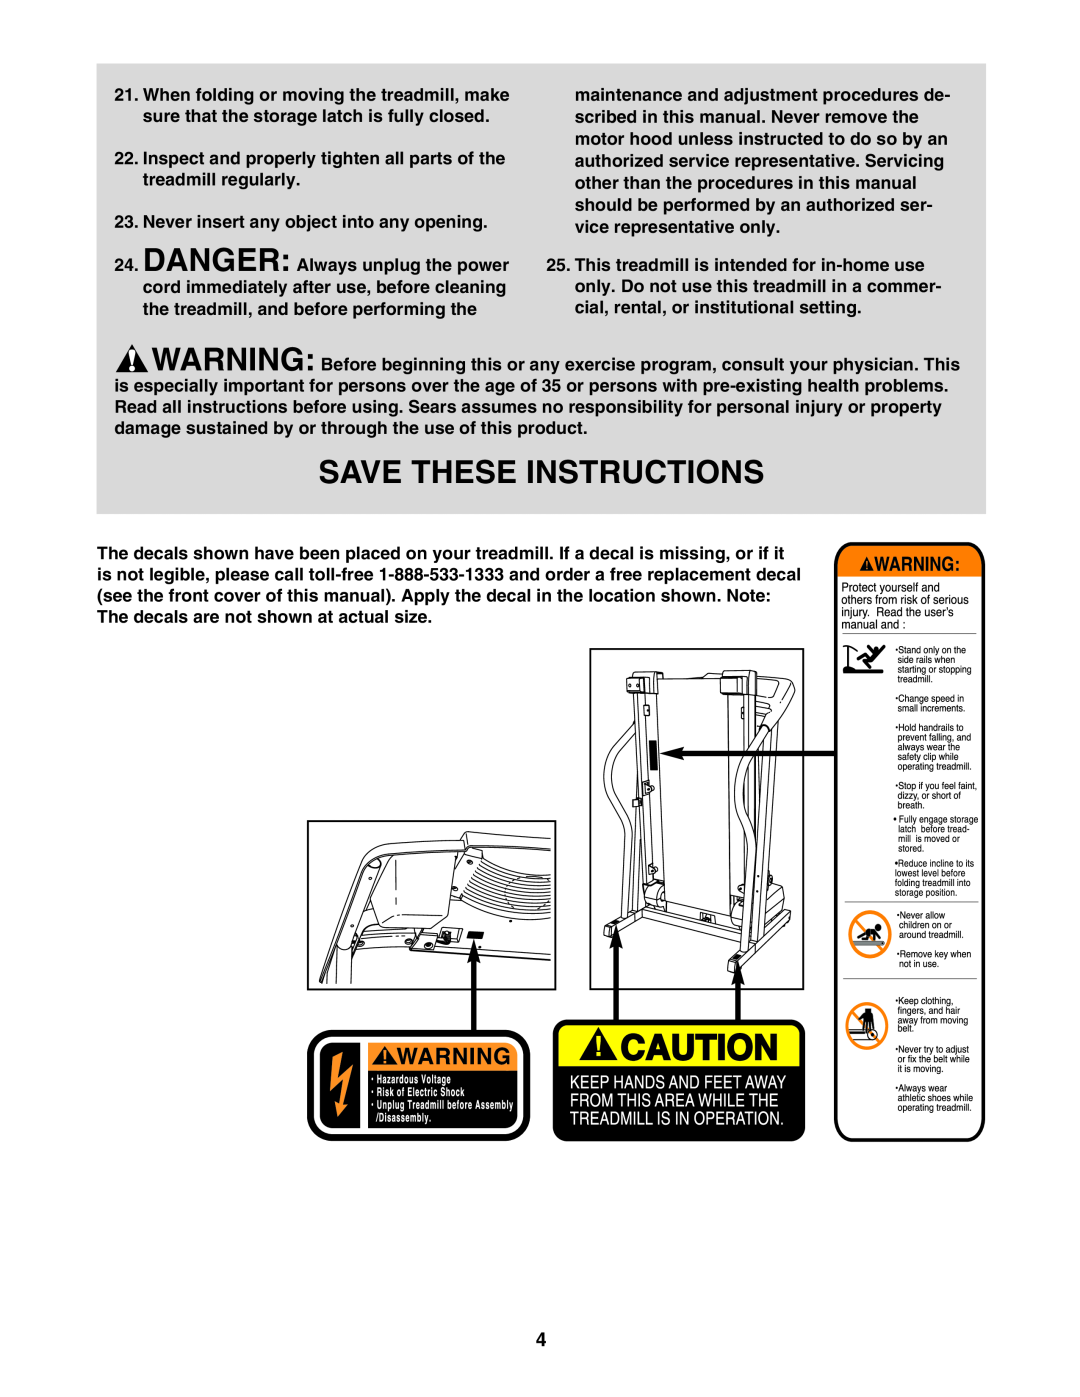 ProForm 831.295230 user manual Save These Instructions, Inspect and properly tighten all parts of the treadmill regularly 